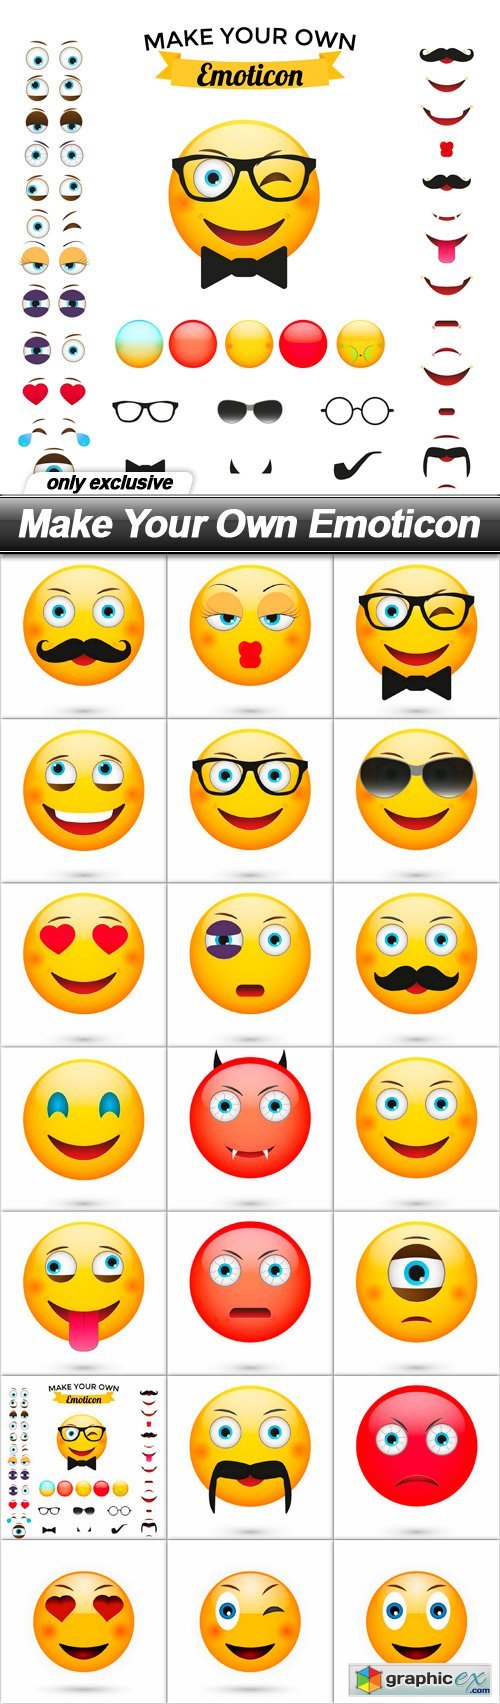 Make Your Own Emoticon - 21 EPS